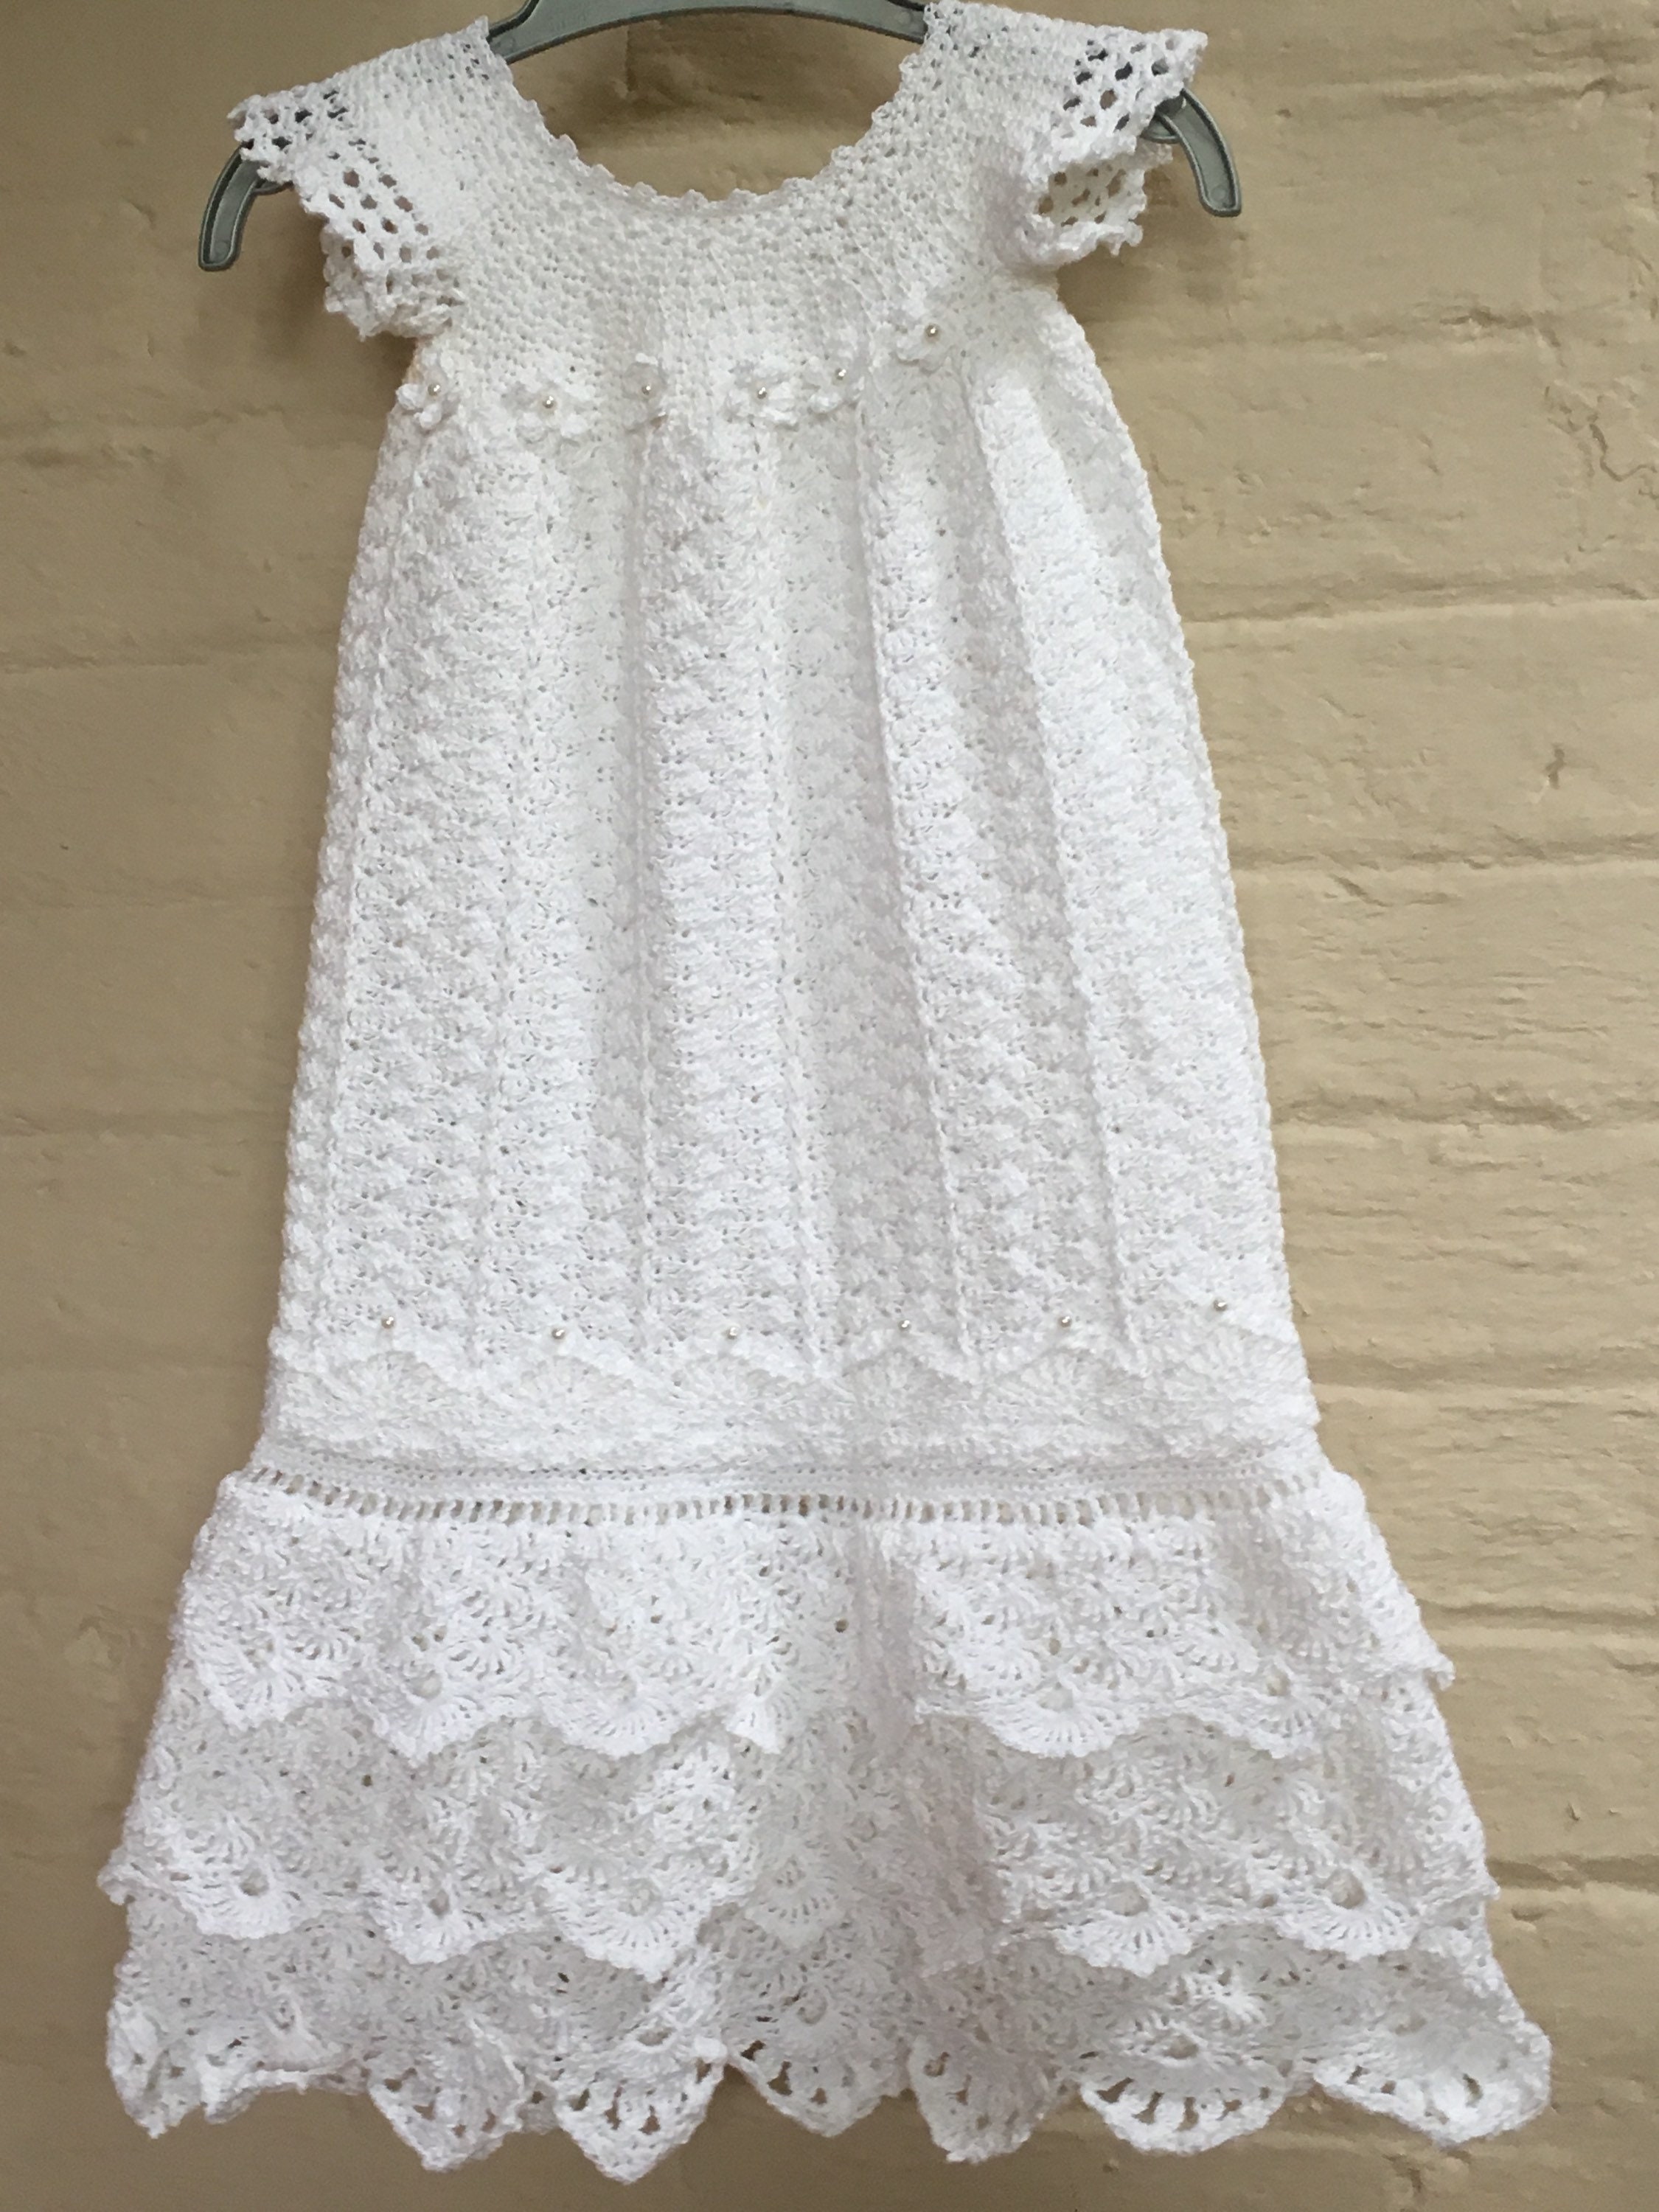 Crochet Gown Baby Andrea Christening Pattern, Christening Dress, Crochet  Pattern, Crochet Baby Dress, Pattern, Baby Dress, Pdf, Thread - Etsy